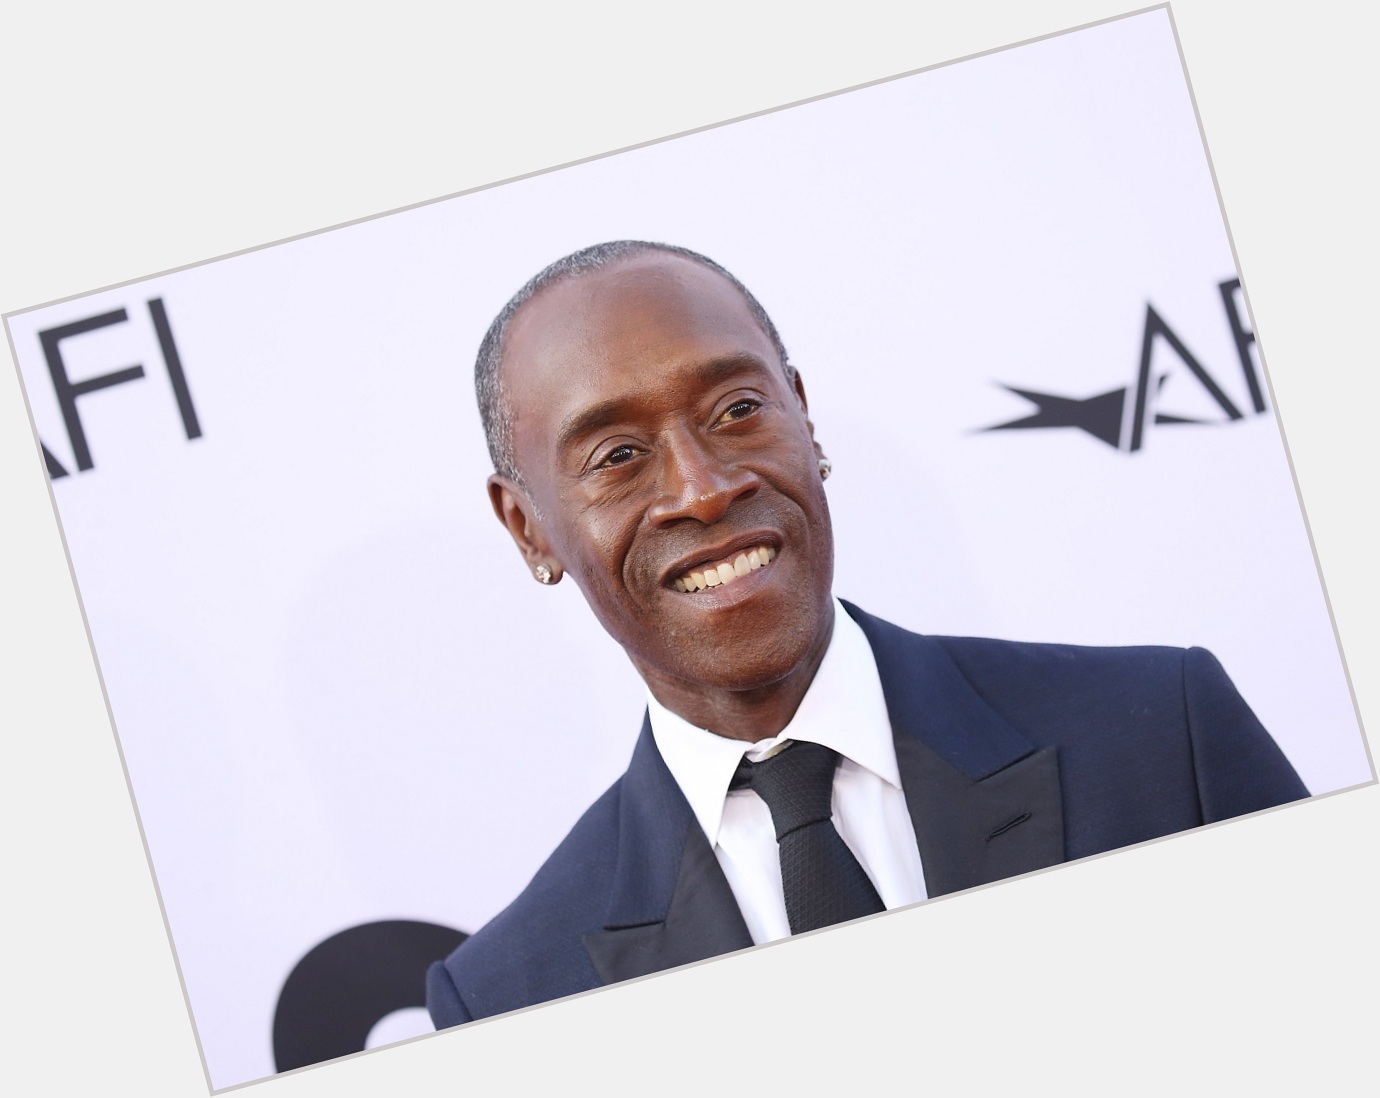 Happy birthday to the great Don Cheadle, the actor who plays War Machine in the MCU  